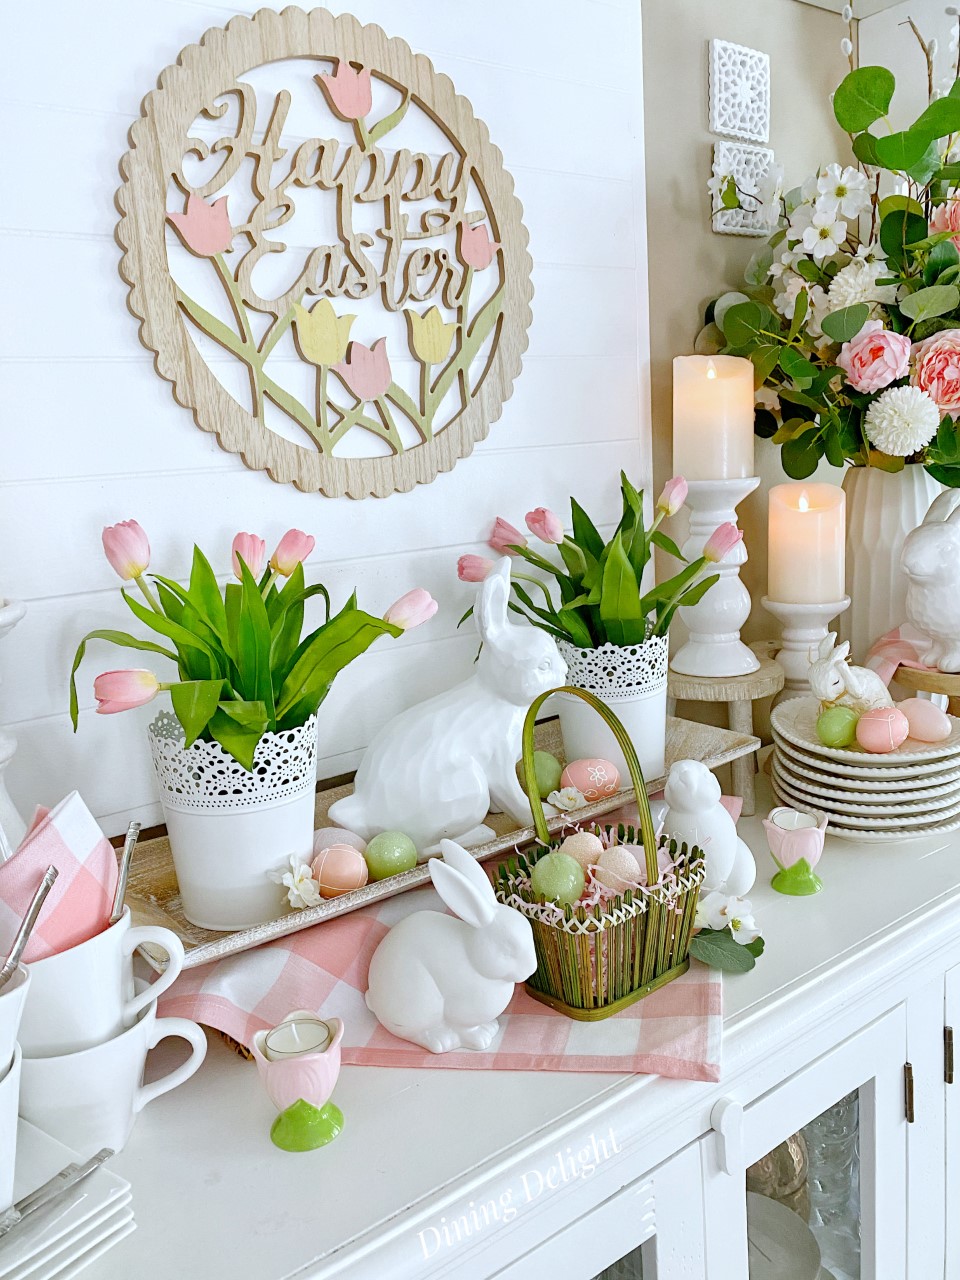 Target Has New Easter Decor Starting at $3 – SheKnows